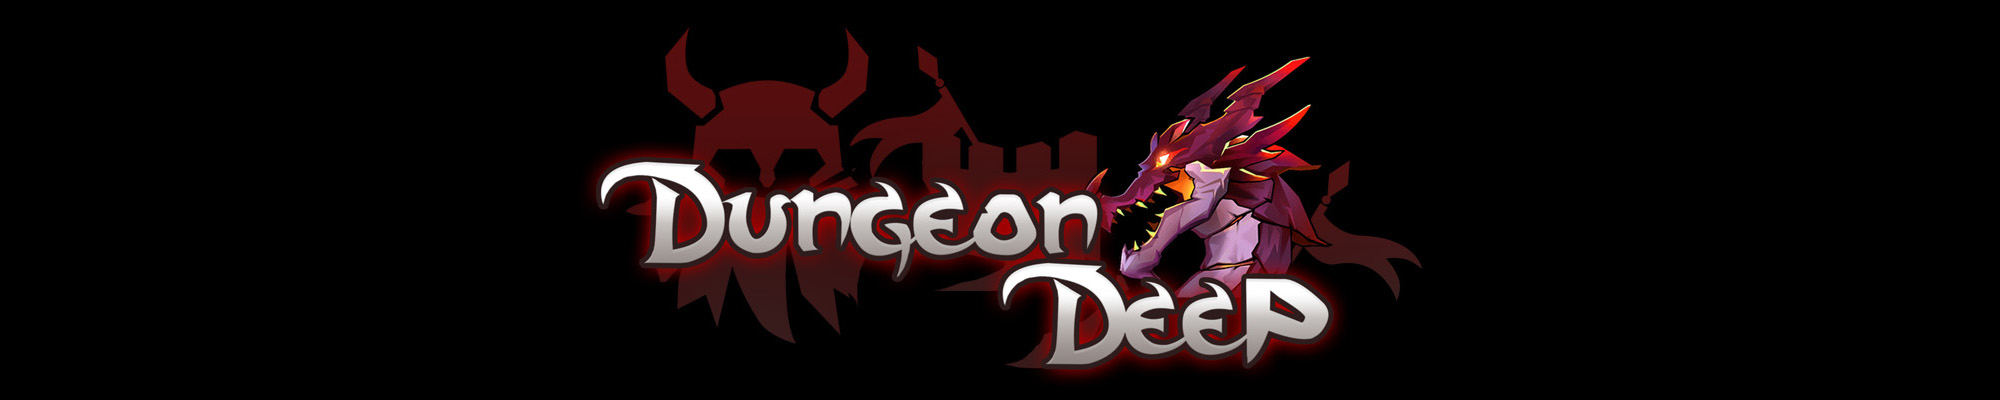 Dungeon Deep Patch Note #20200531